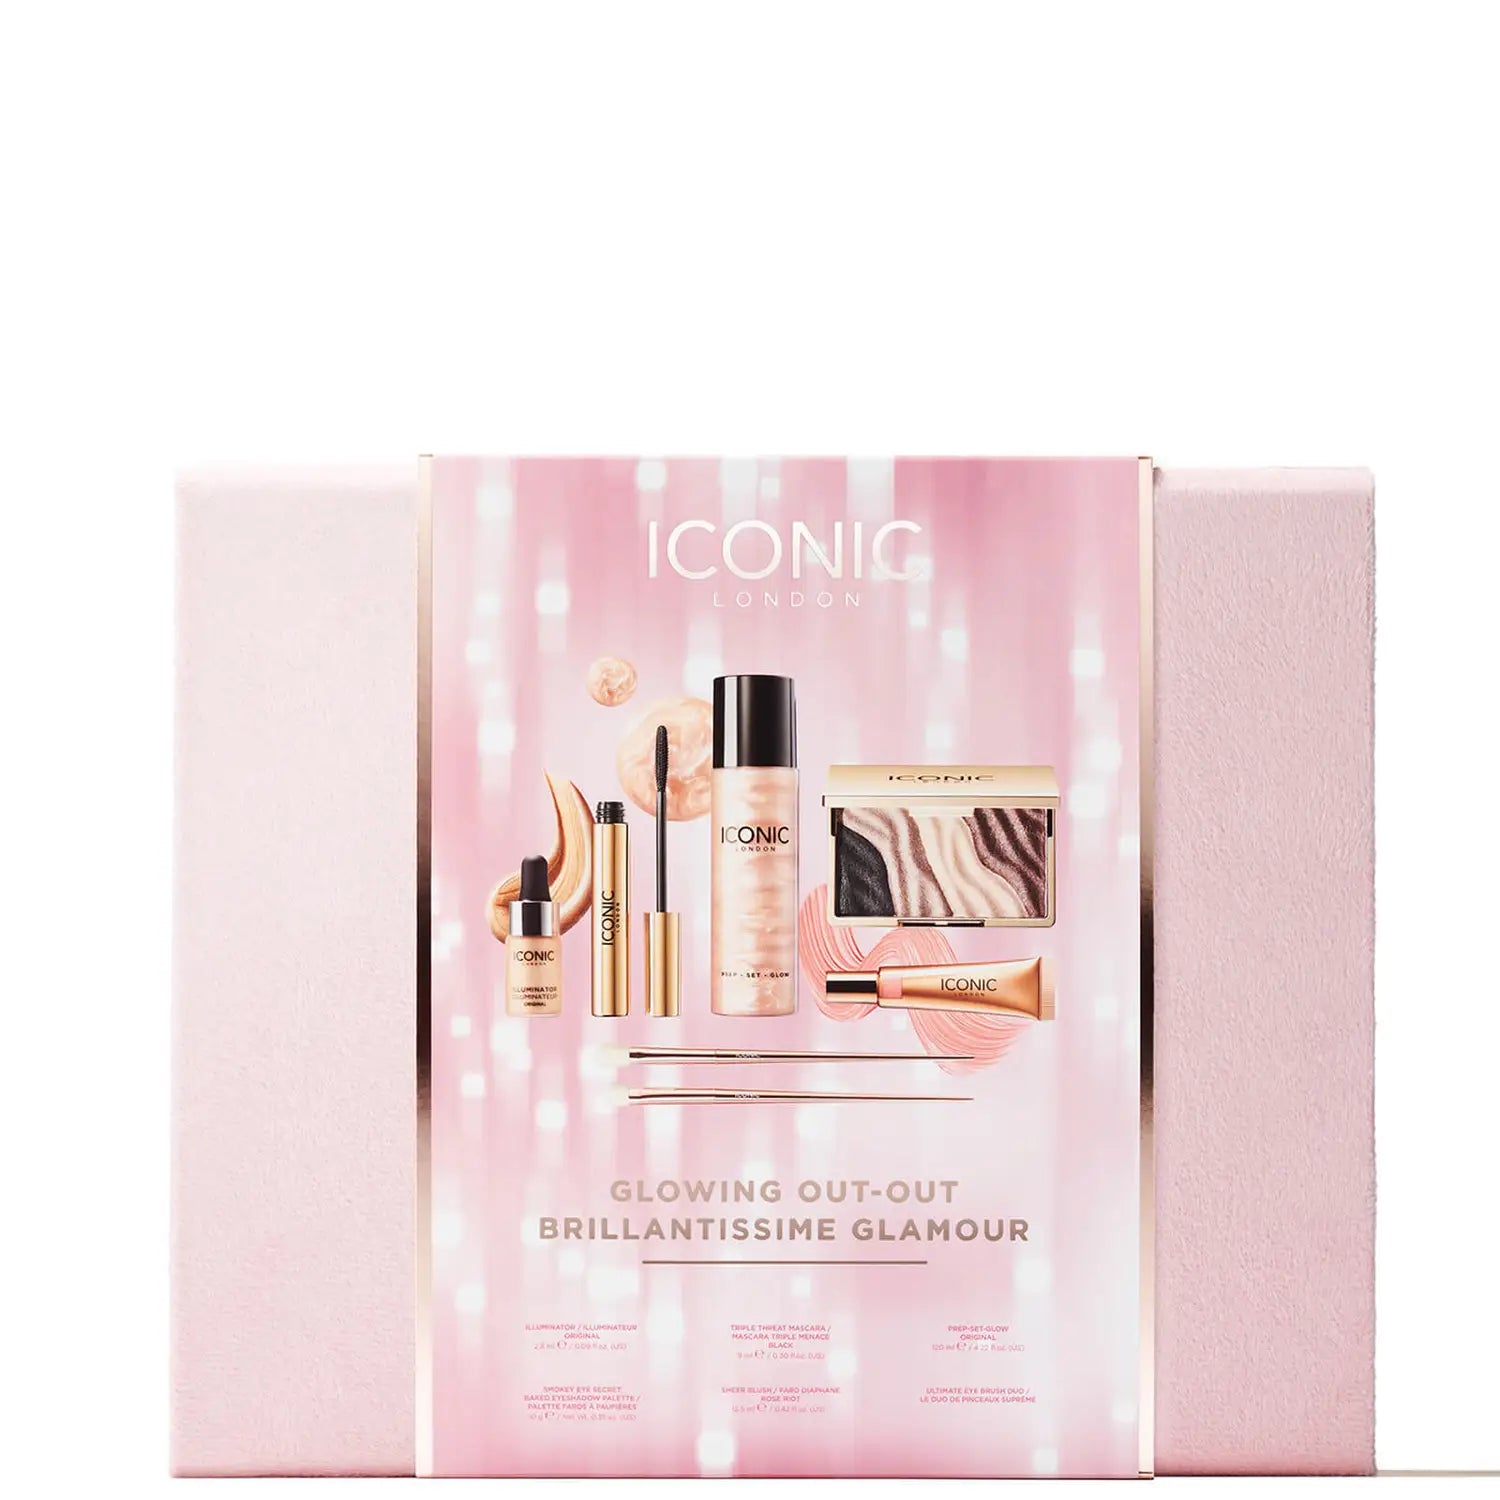 ICONIC London Glowing Out Out Set, packaging